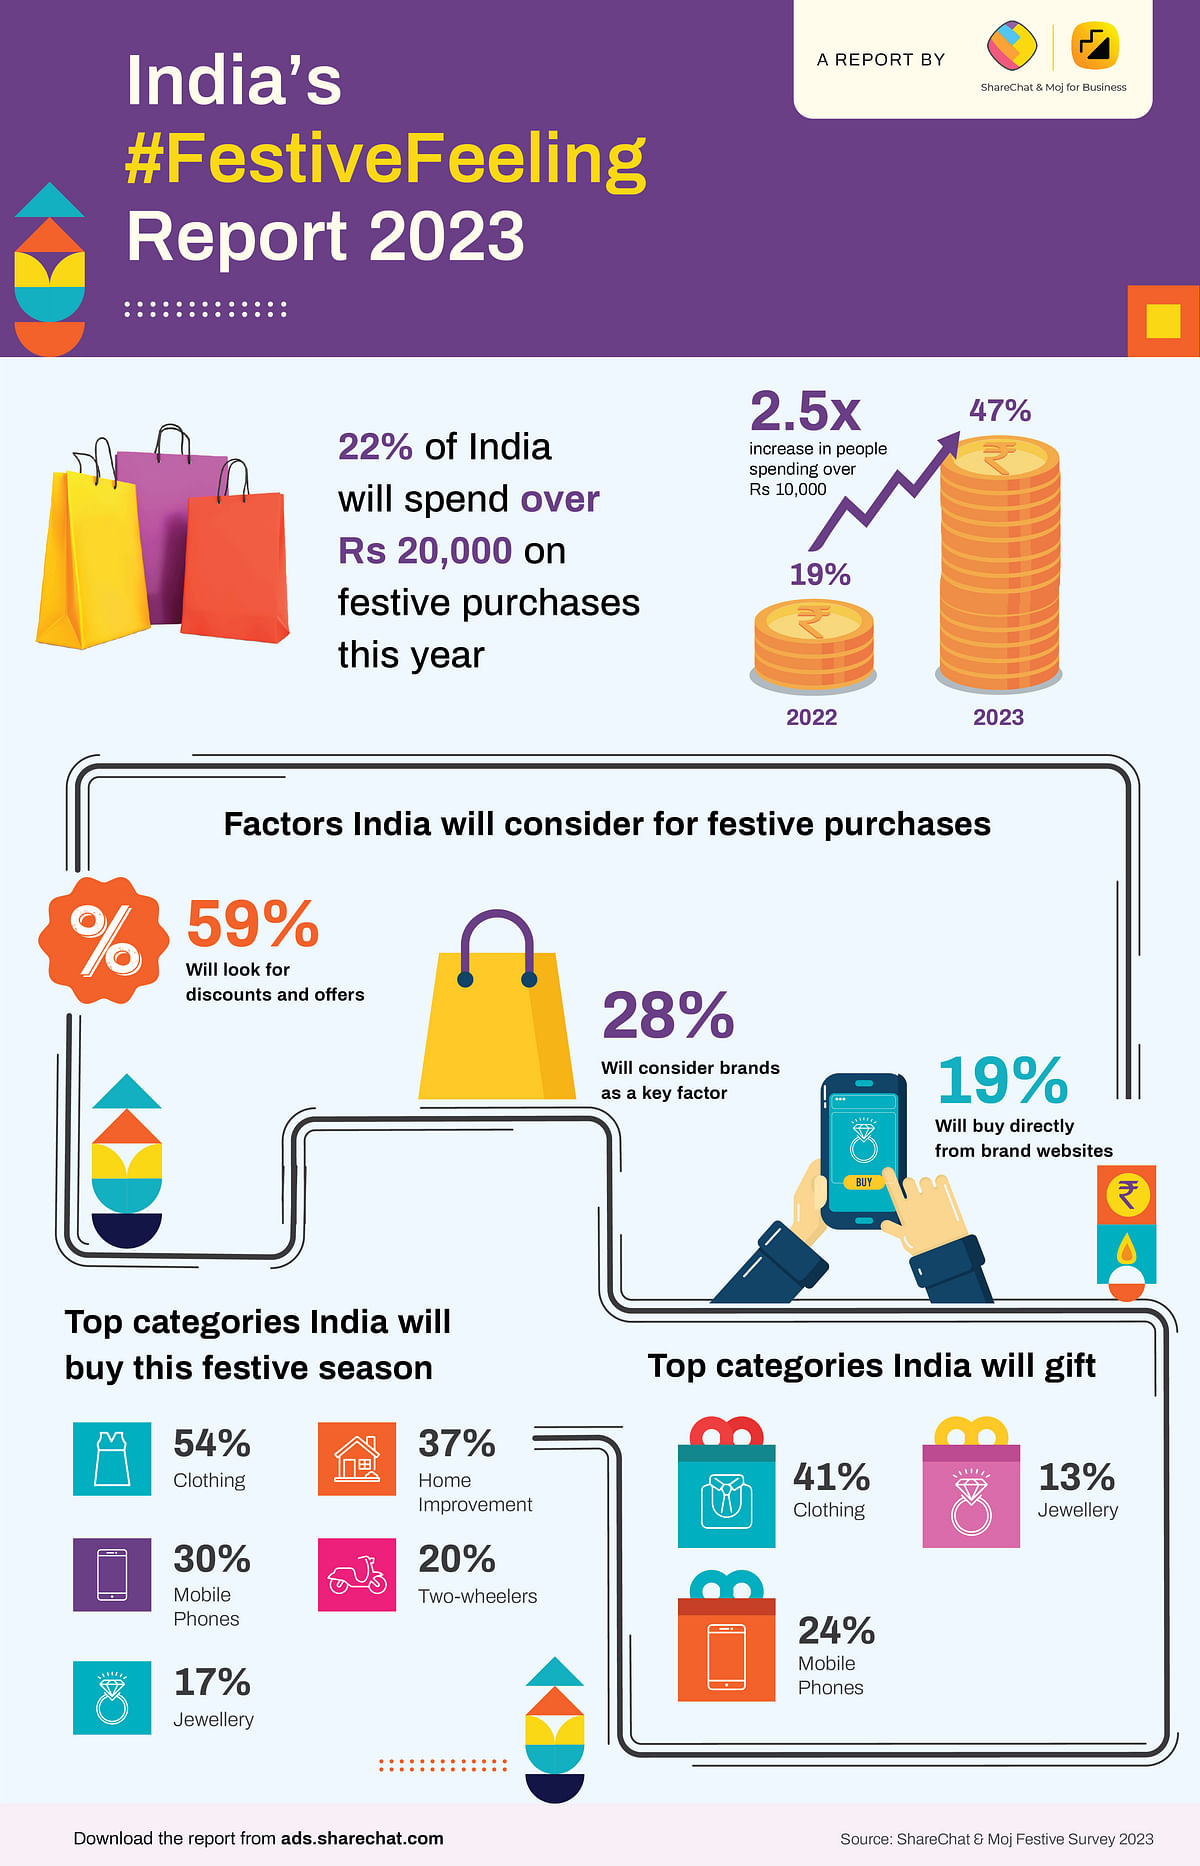 66% of Indians to tap into savings and prioritise discounts for festive shopping reveals ShareChat & Moj report